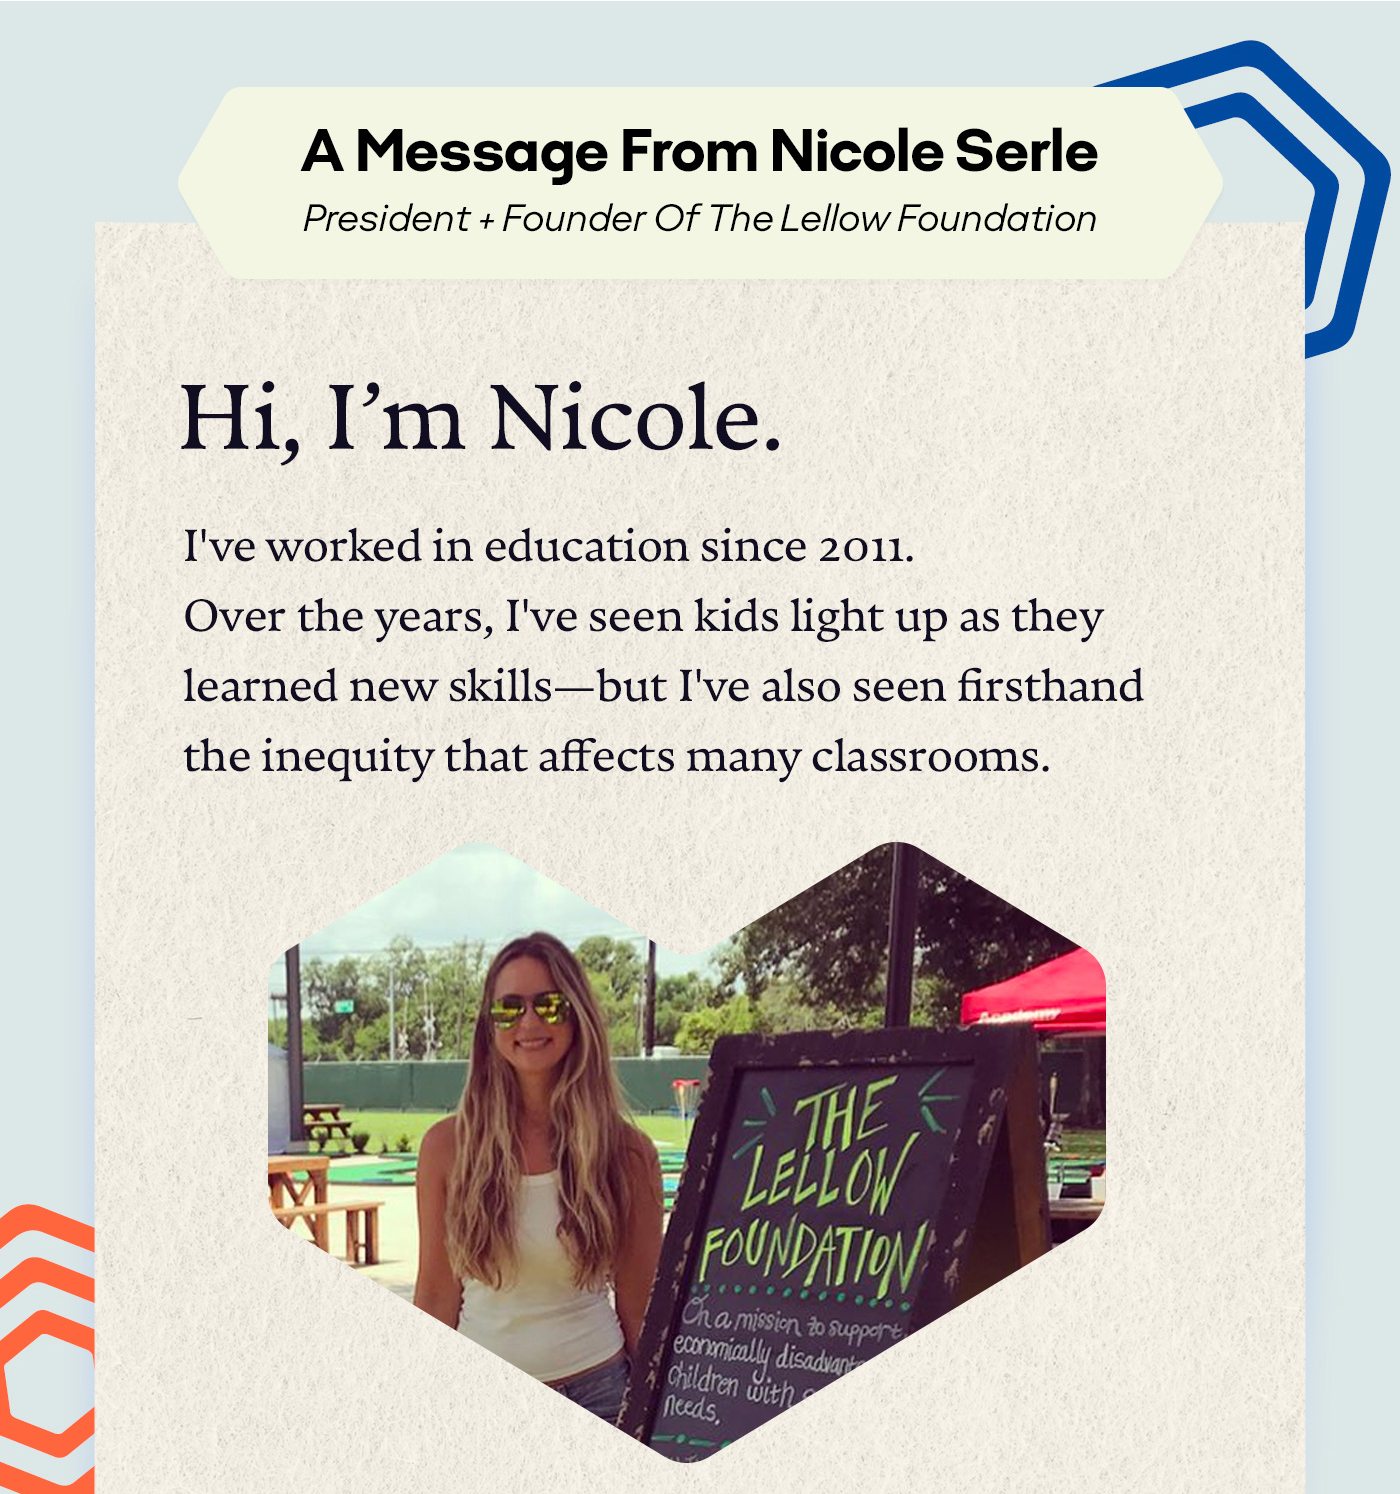 A Message From Nicole Serle: President + Founder Of The Lellow Foundation | Hi, I'm Nicole. I've worked in education since 2011. Over the years, I've seen kids light up as they learned new skills—but I've also seen firsthand the inequity that affects many classrooms.